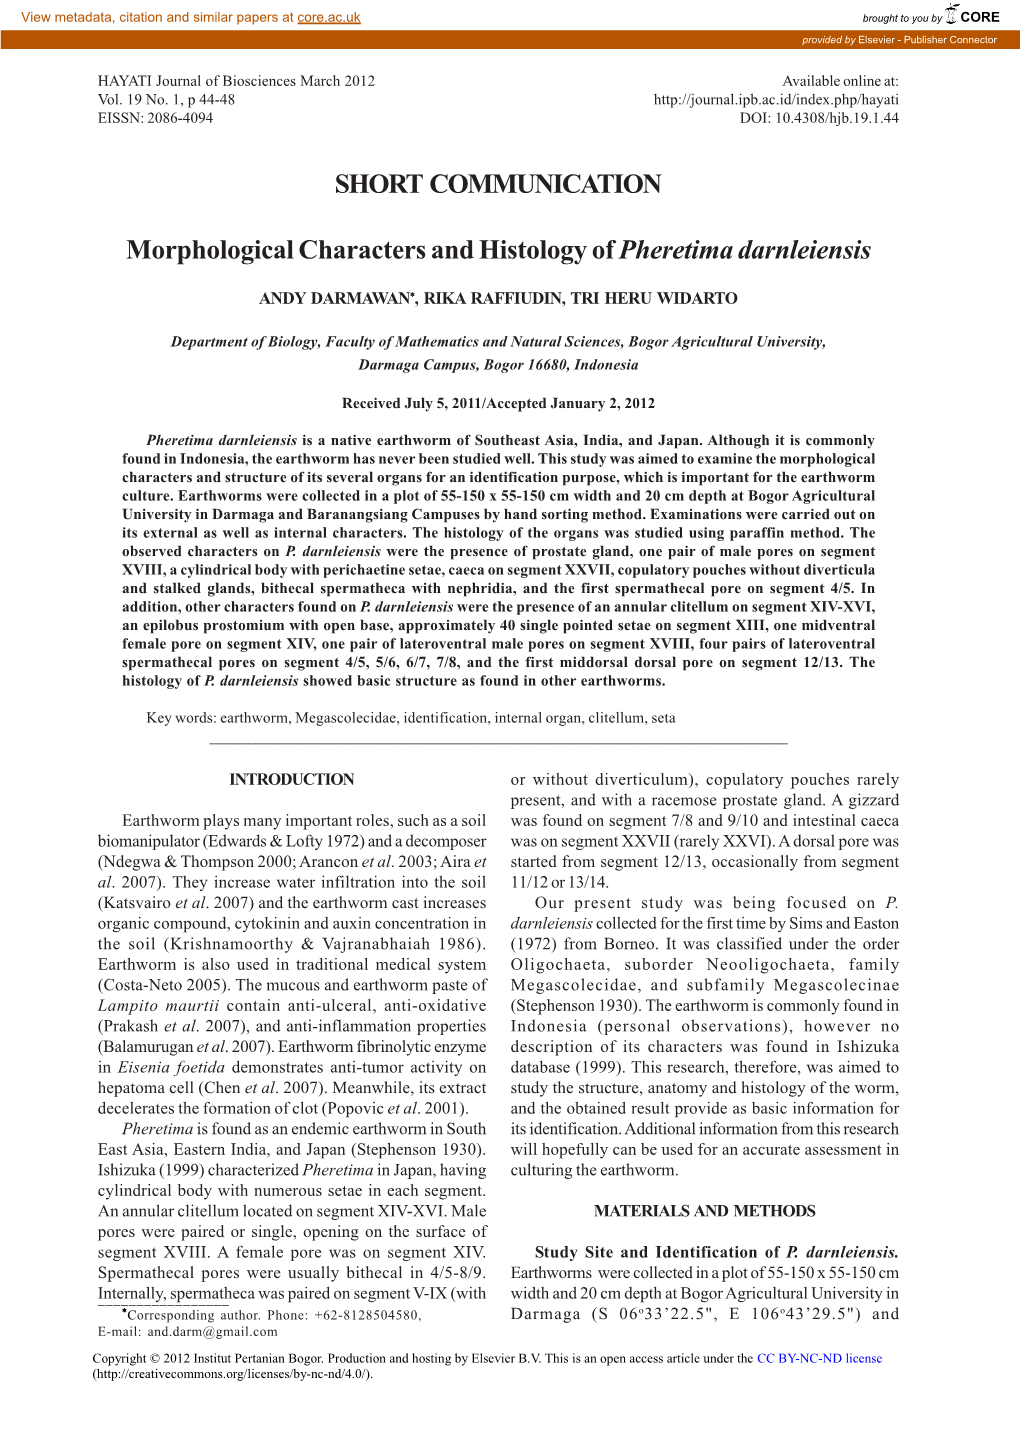 Morphological Characters and Histology of Pheretima Darnleiensis